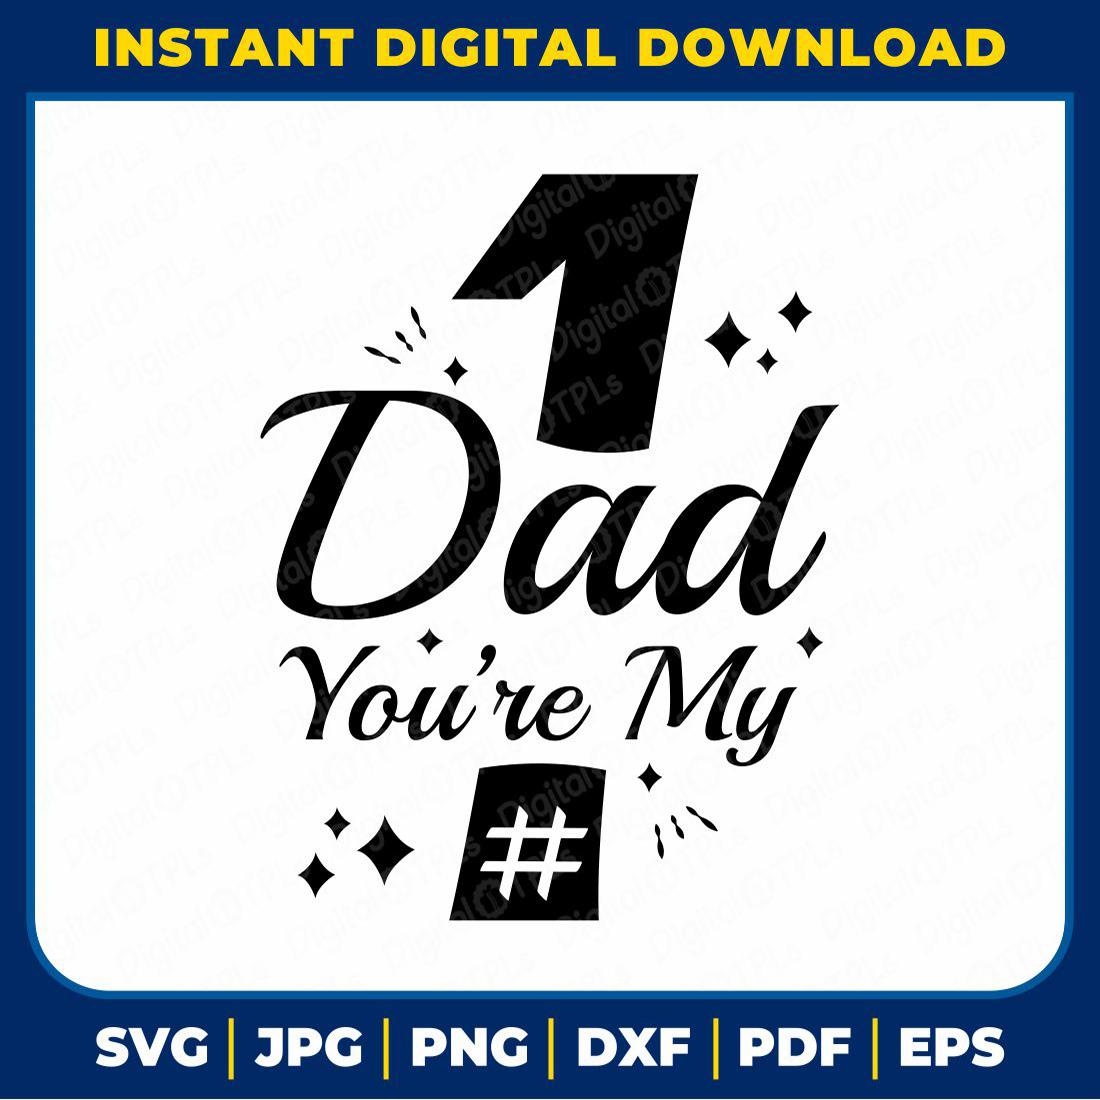 Dad You're My No1 SVG | Father’s Day SVG, DXF, EPS, JPG, PNG & PDF Files cover image.